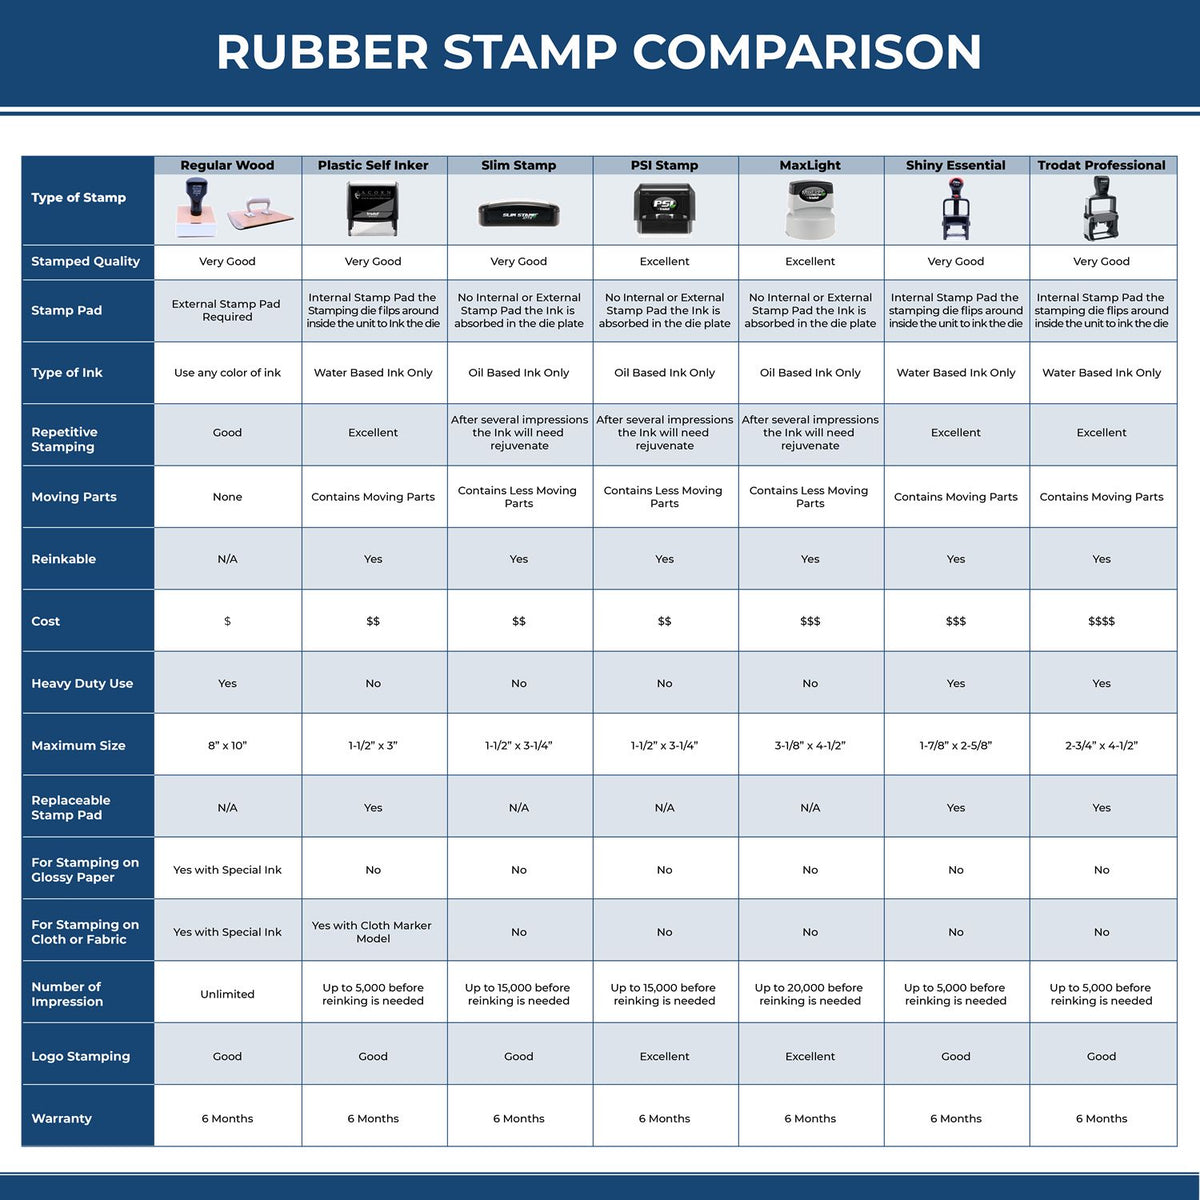 A comparison chart for the different types of mount models available for the Super Slim Oregon Notary Public Stamp.